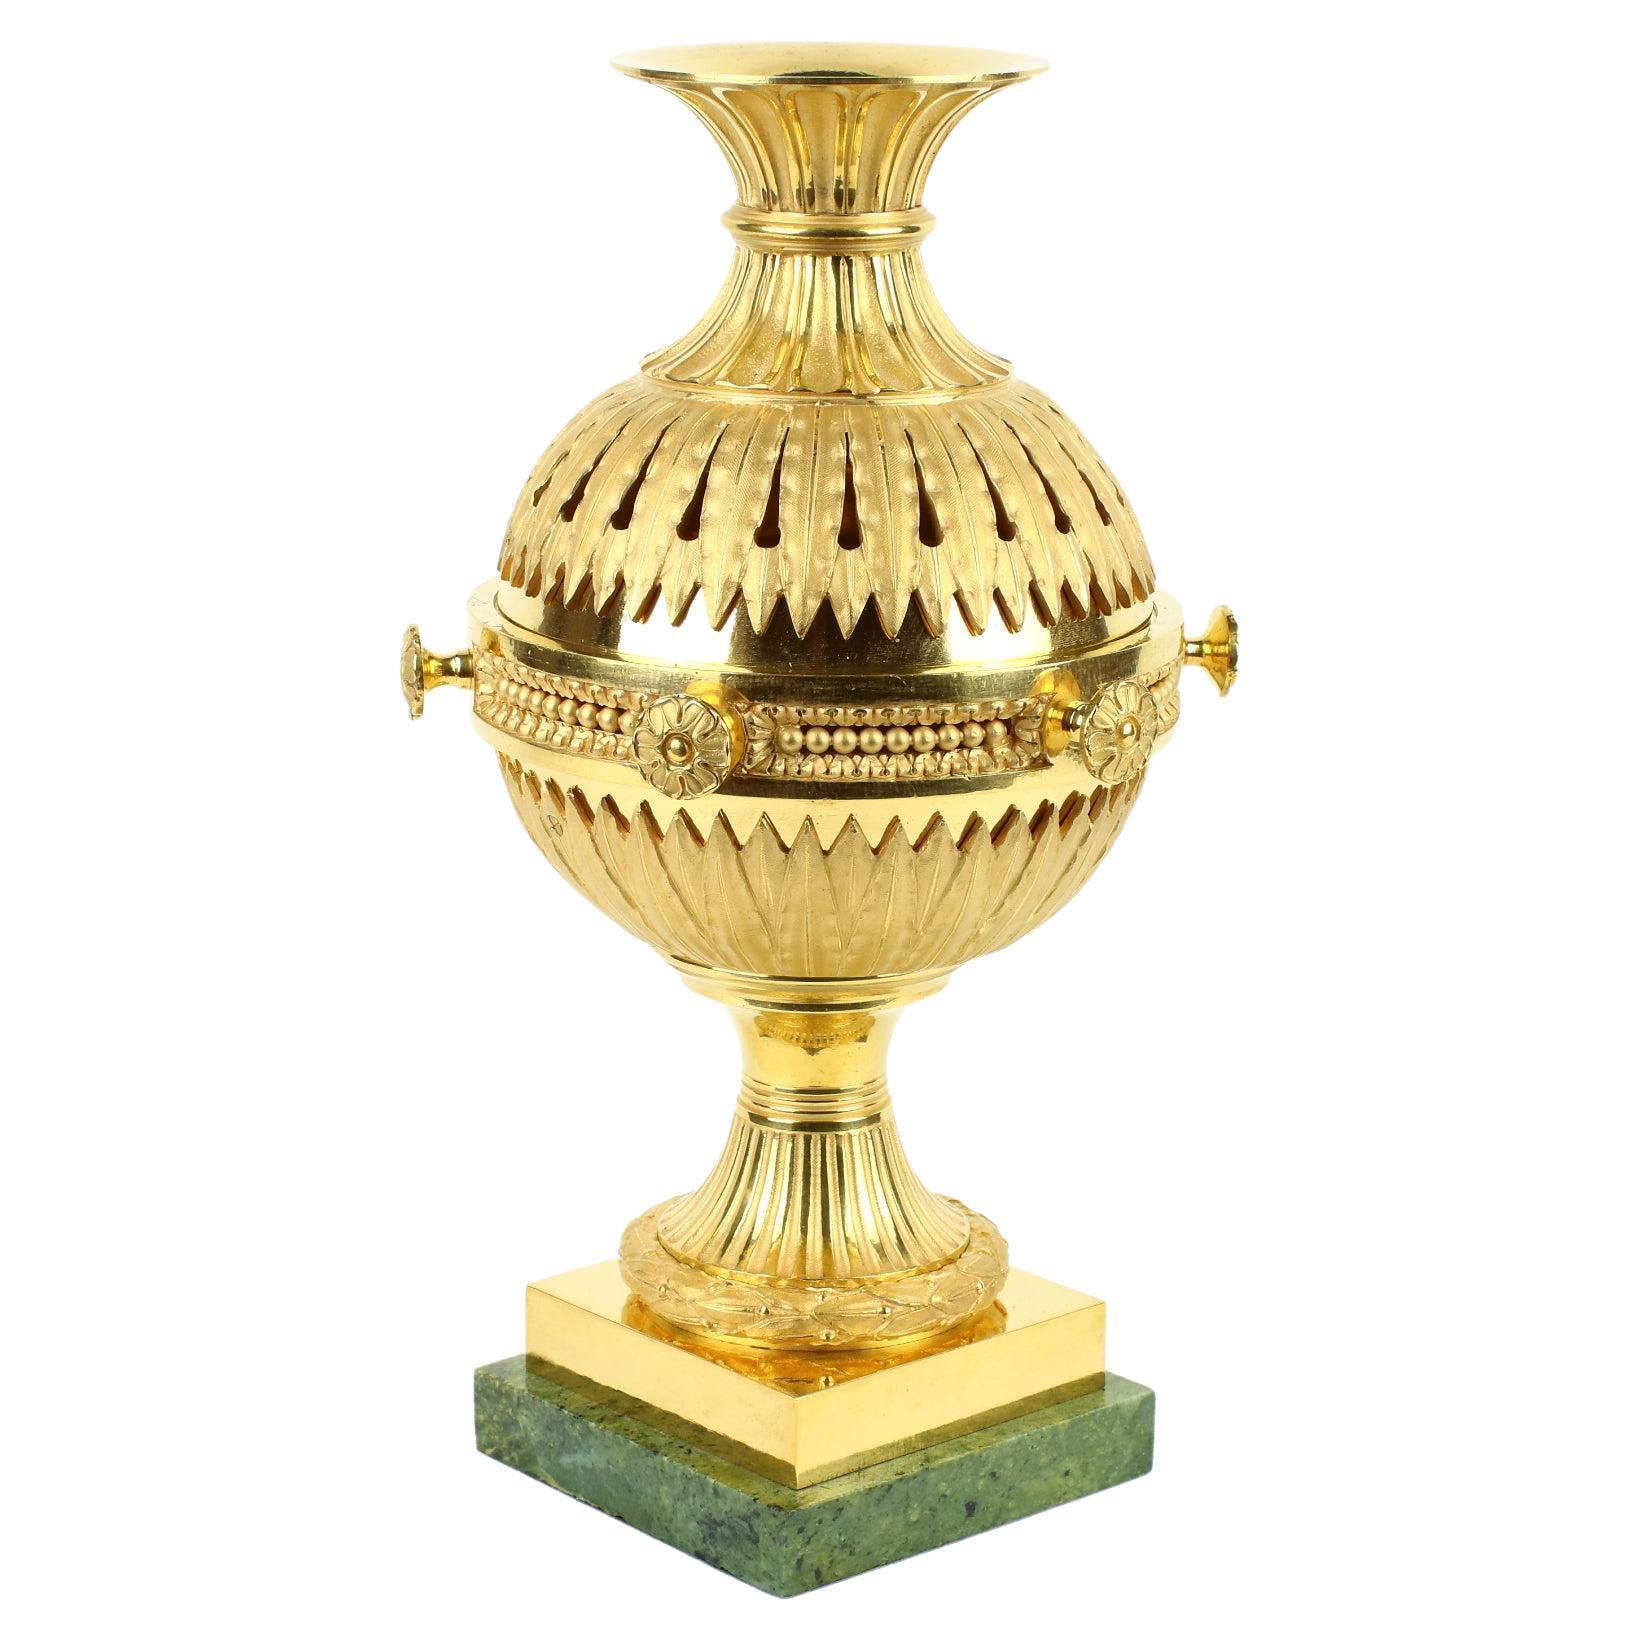 French Late 18thh Century Louis XVI Gilt Bronze Incense Burner or Brule Parfum For Sale